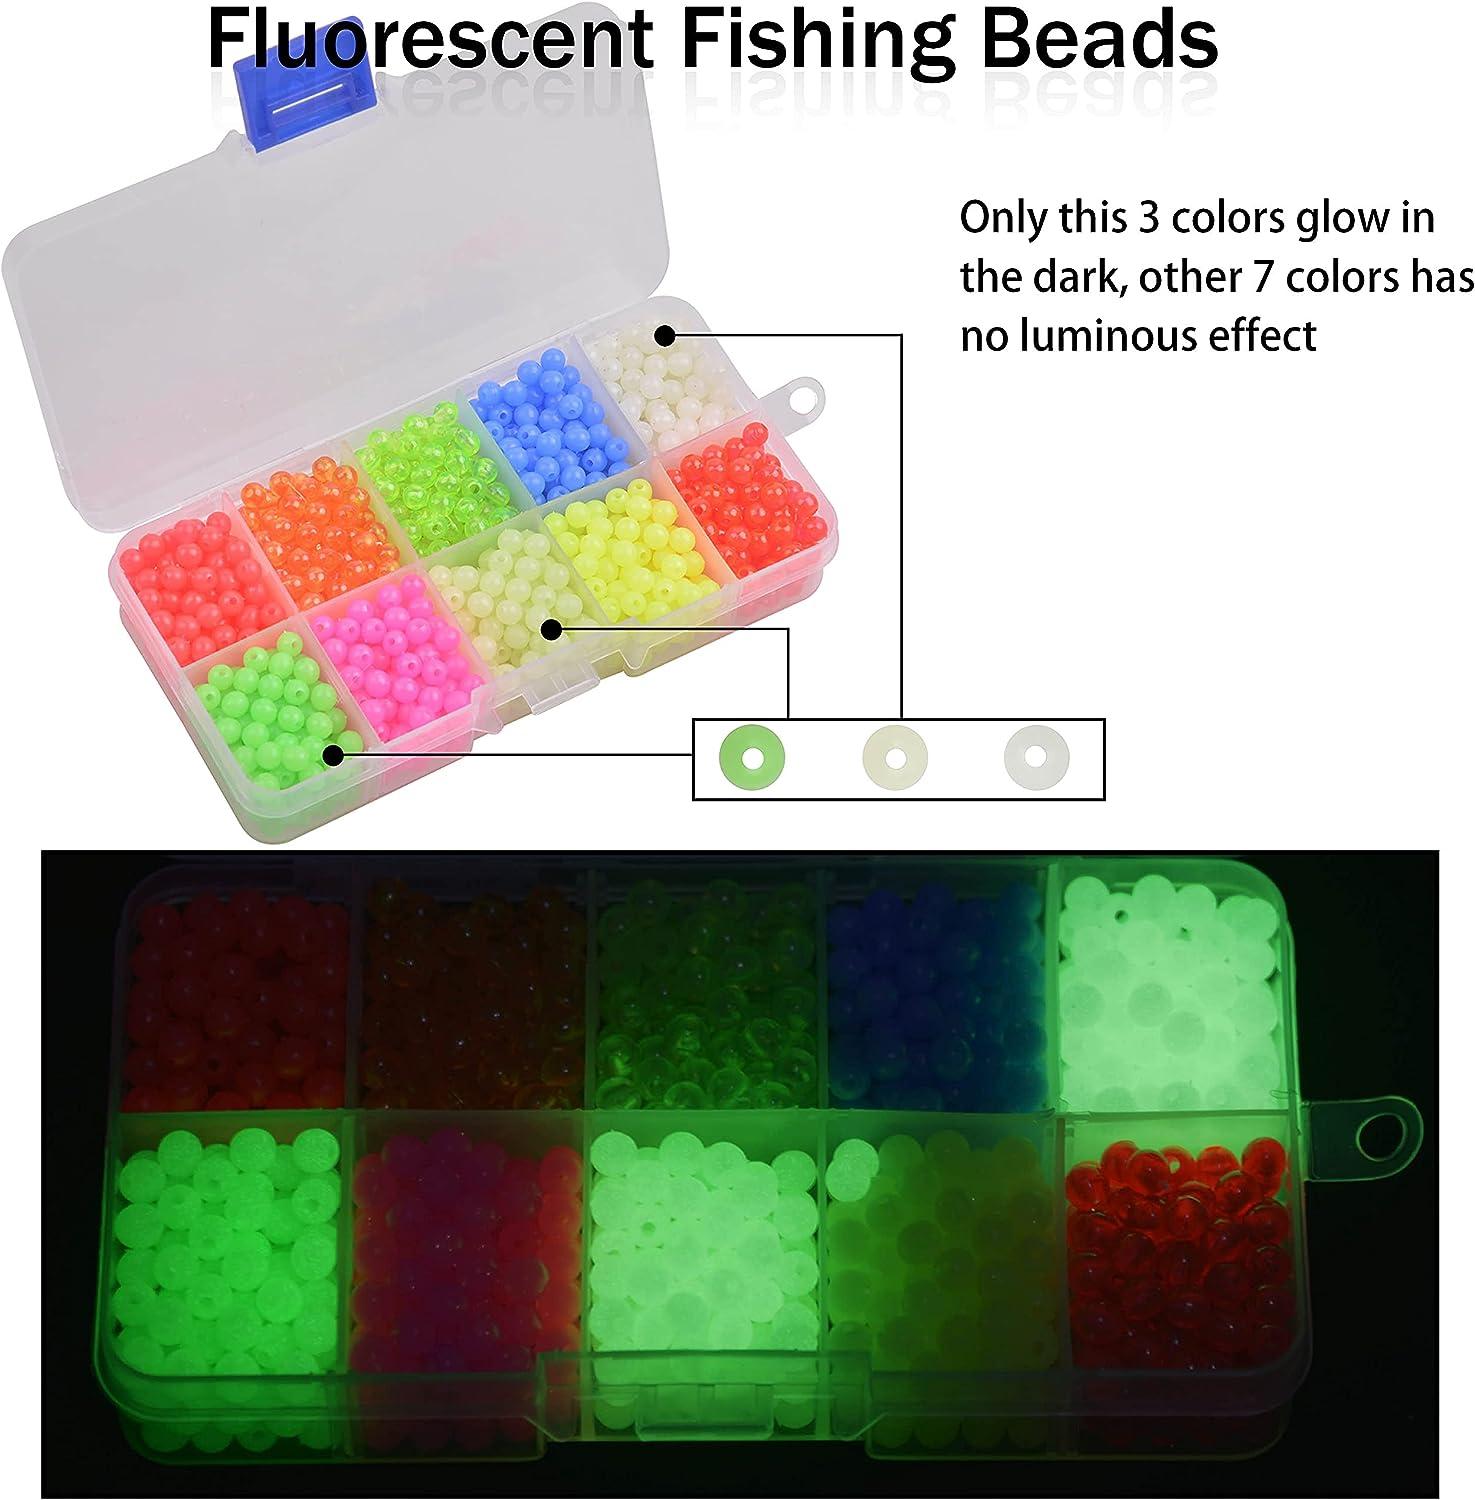 1000pcs/Box Fishing Beads Lure 5mm Luminous Fishing Floats Night Glow Beads  Fishing Tackle Lures Bead Bait Pasca Accessories on OnBuy